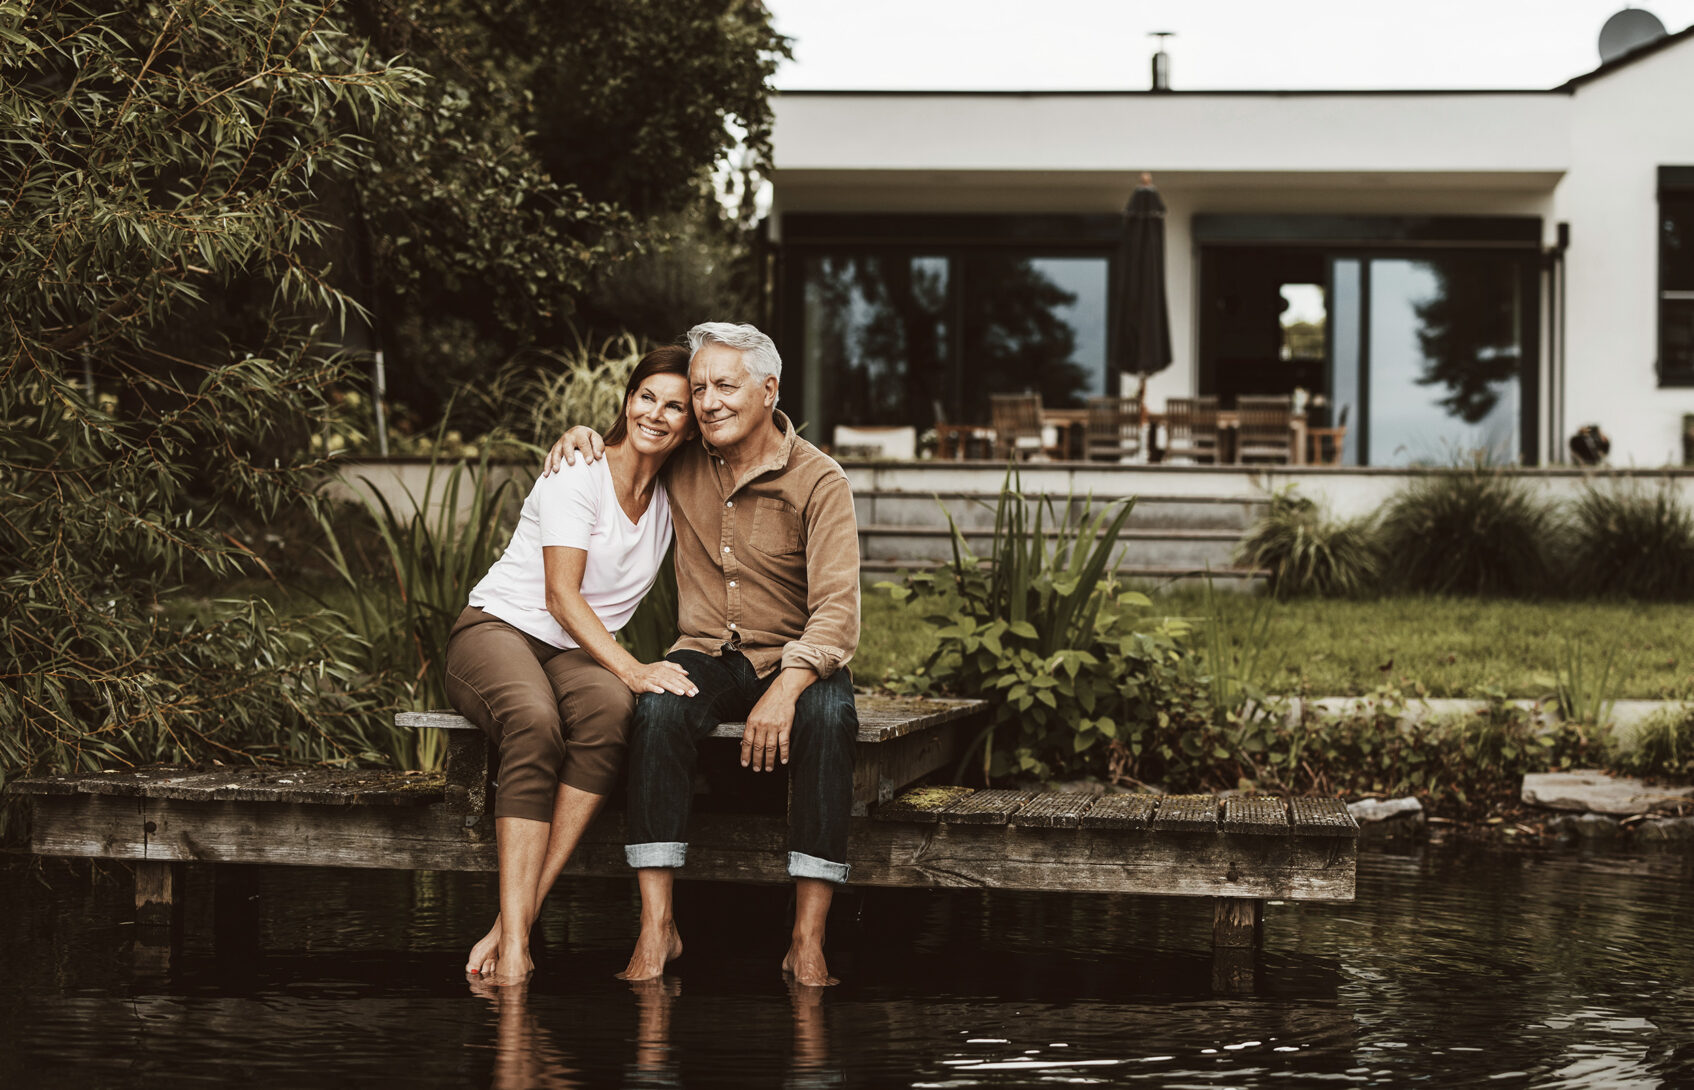 Smiling senior man sitting with arm around woman on jetty by lake